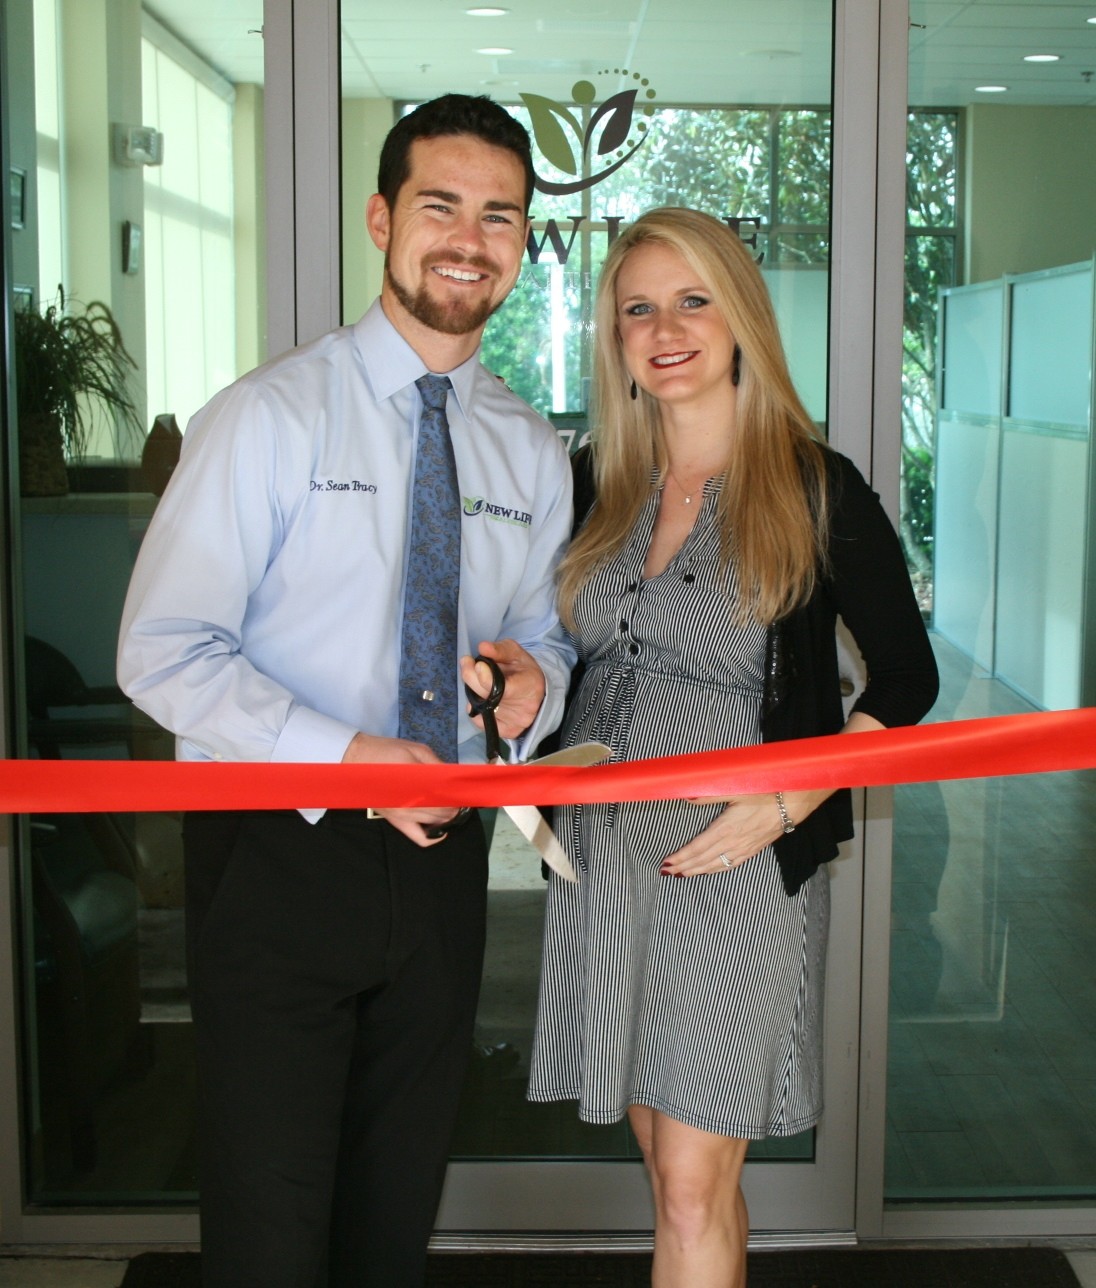 Dr. Sean Tracy and his wife Kelly celebrate New Life Healthcare’s Chamber membership with a ribbon cutting ceremony.